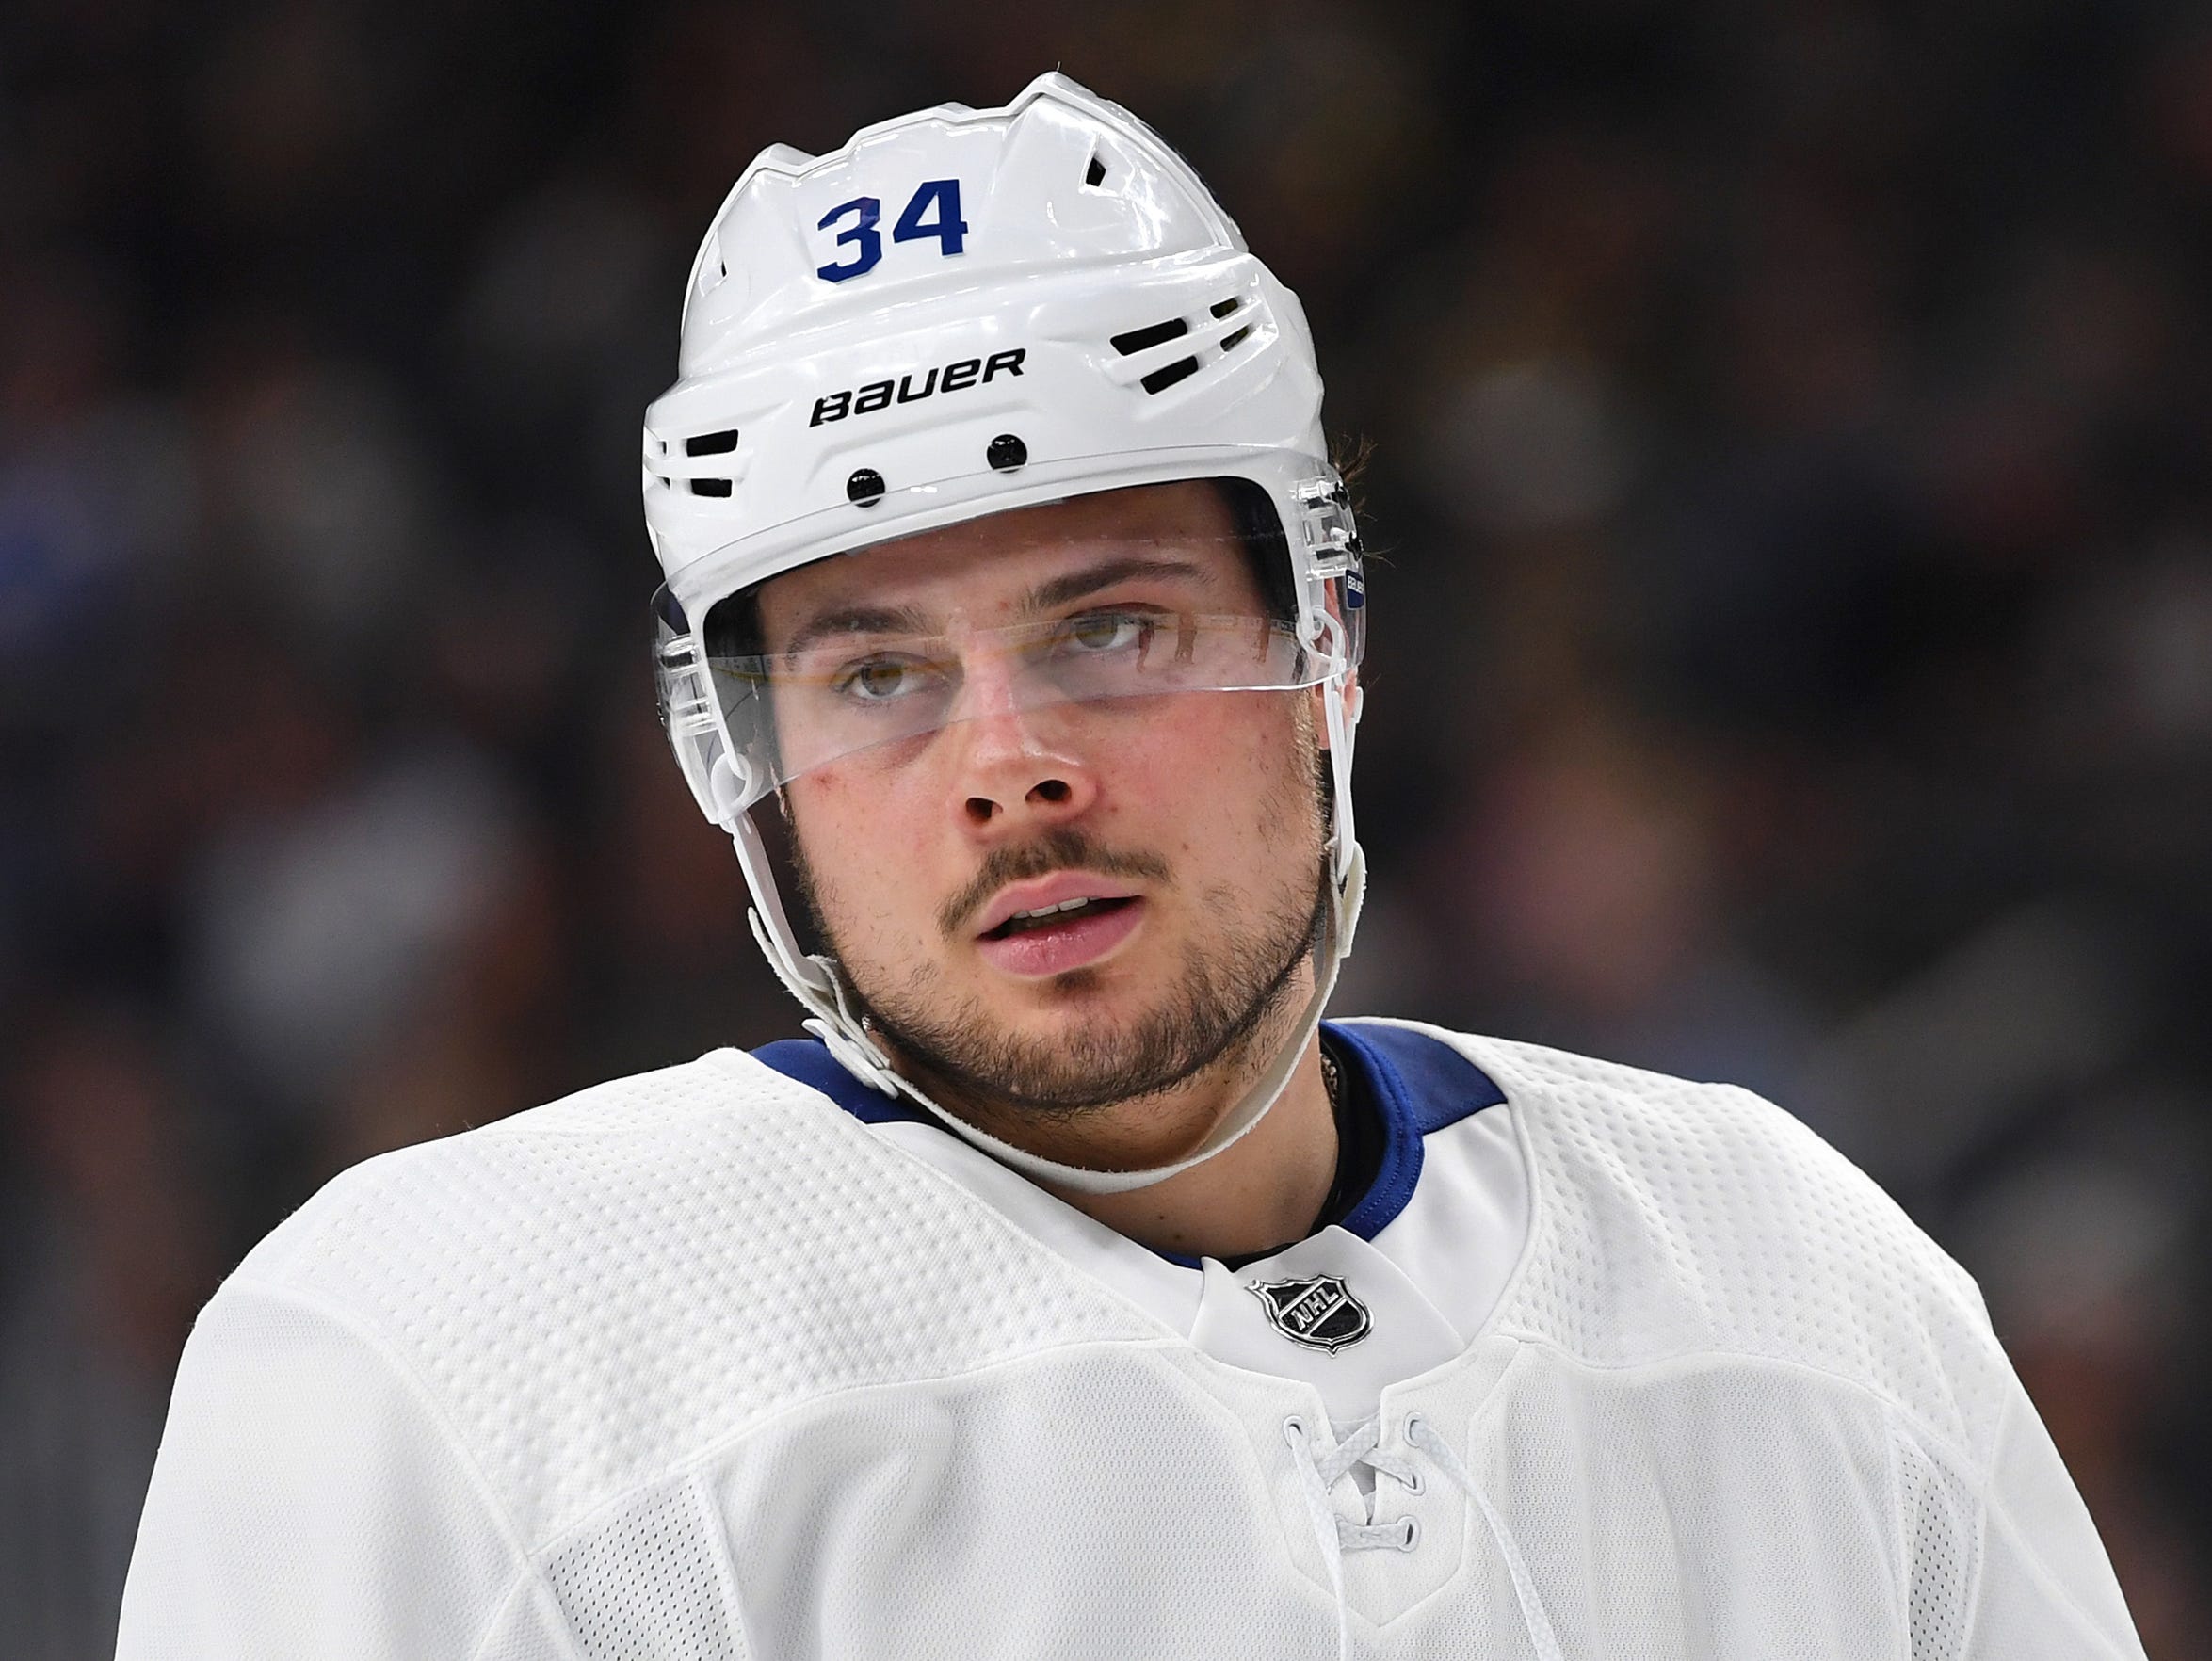 Maple Leafs star Auston Matthews plays in Arizona this weekend for the first time since December 2017.